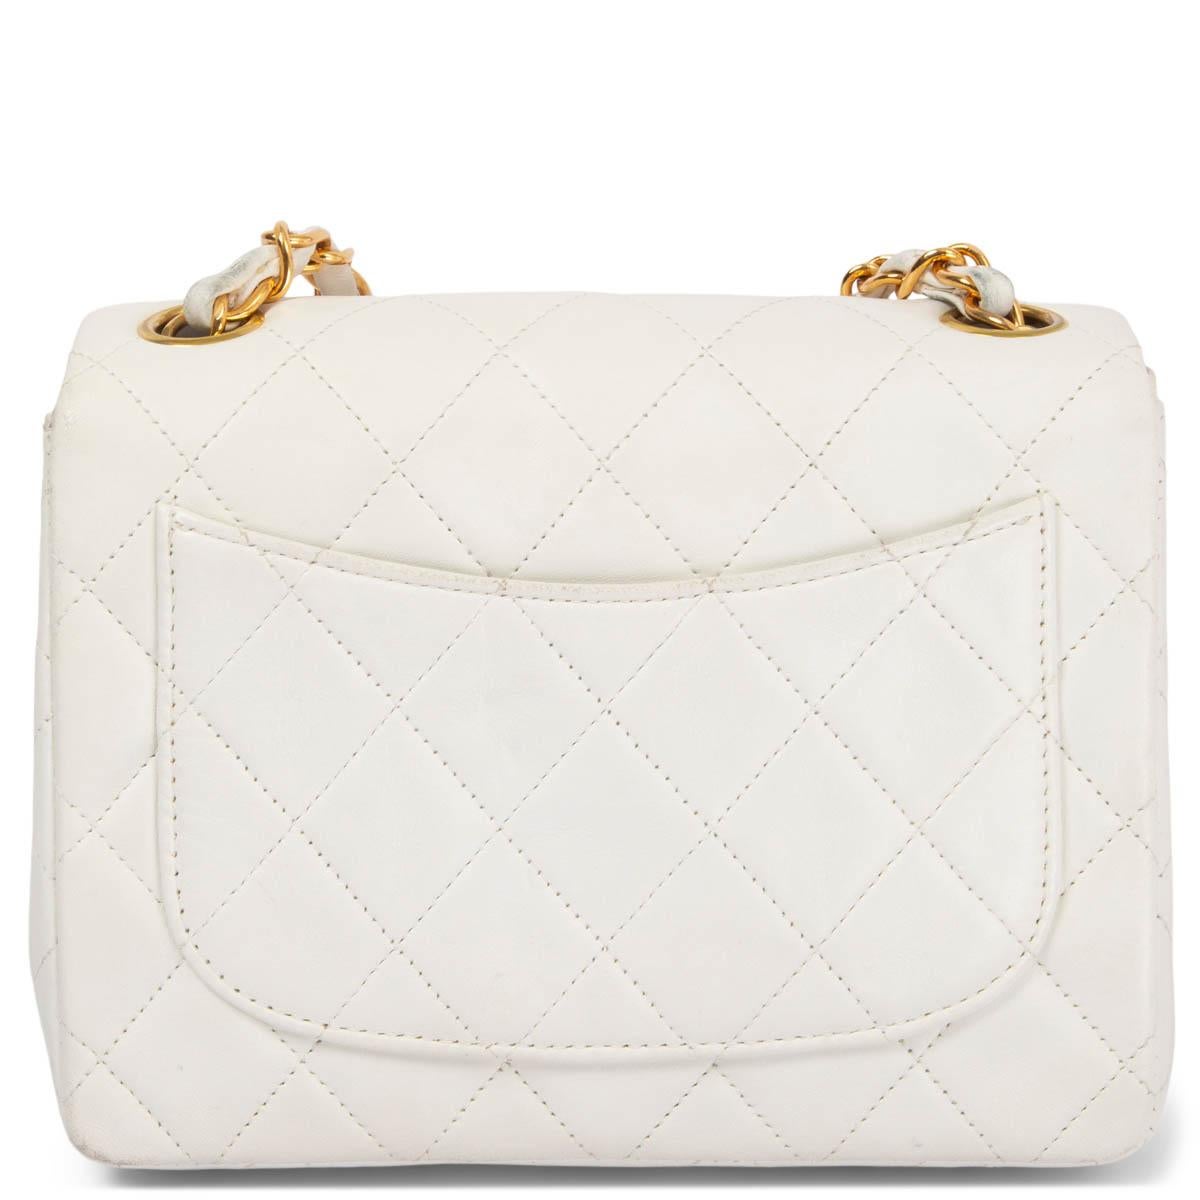 Women's CHANEL white quilted leather 1997-1999 MINI SQUARE FLAP Shoulder Bag